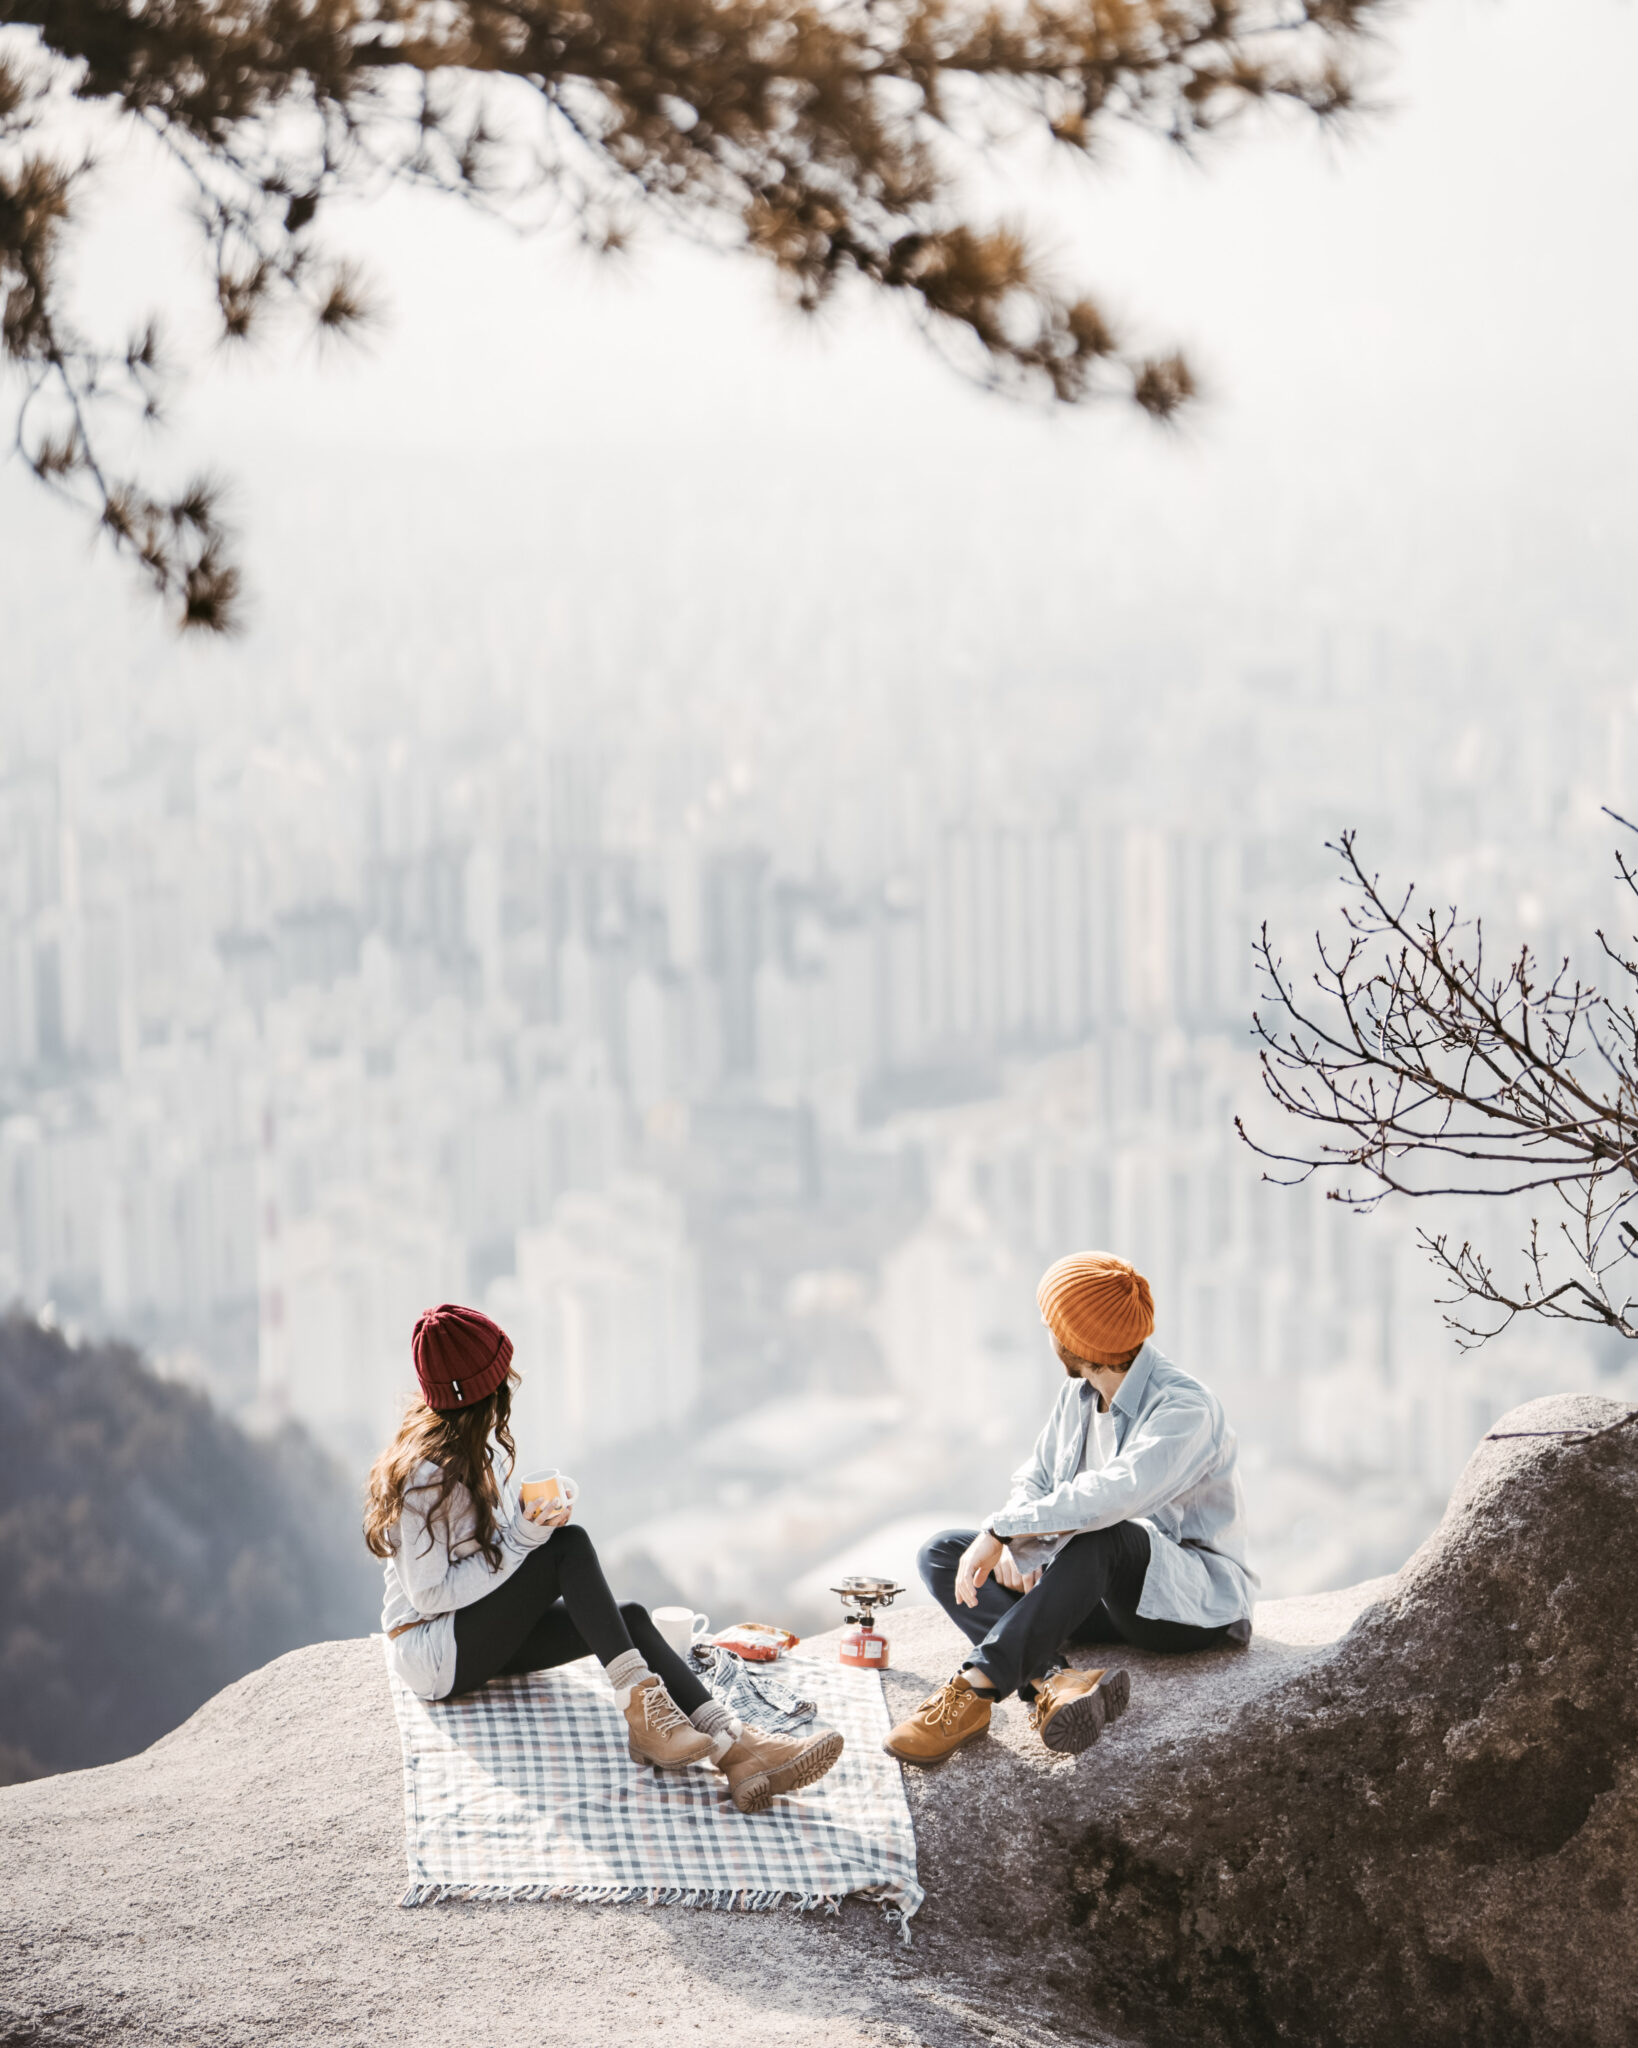 A couple have a picnic on a rock overlooking a beautiful cityscape. This article covers how to cut the costs of your next travel adventure.